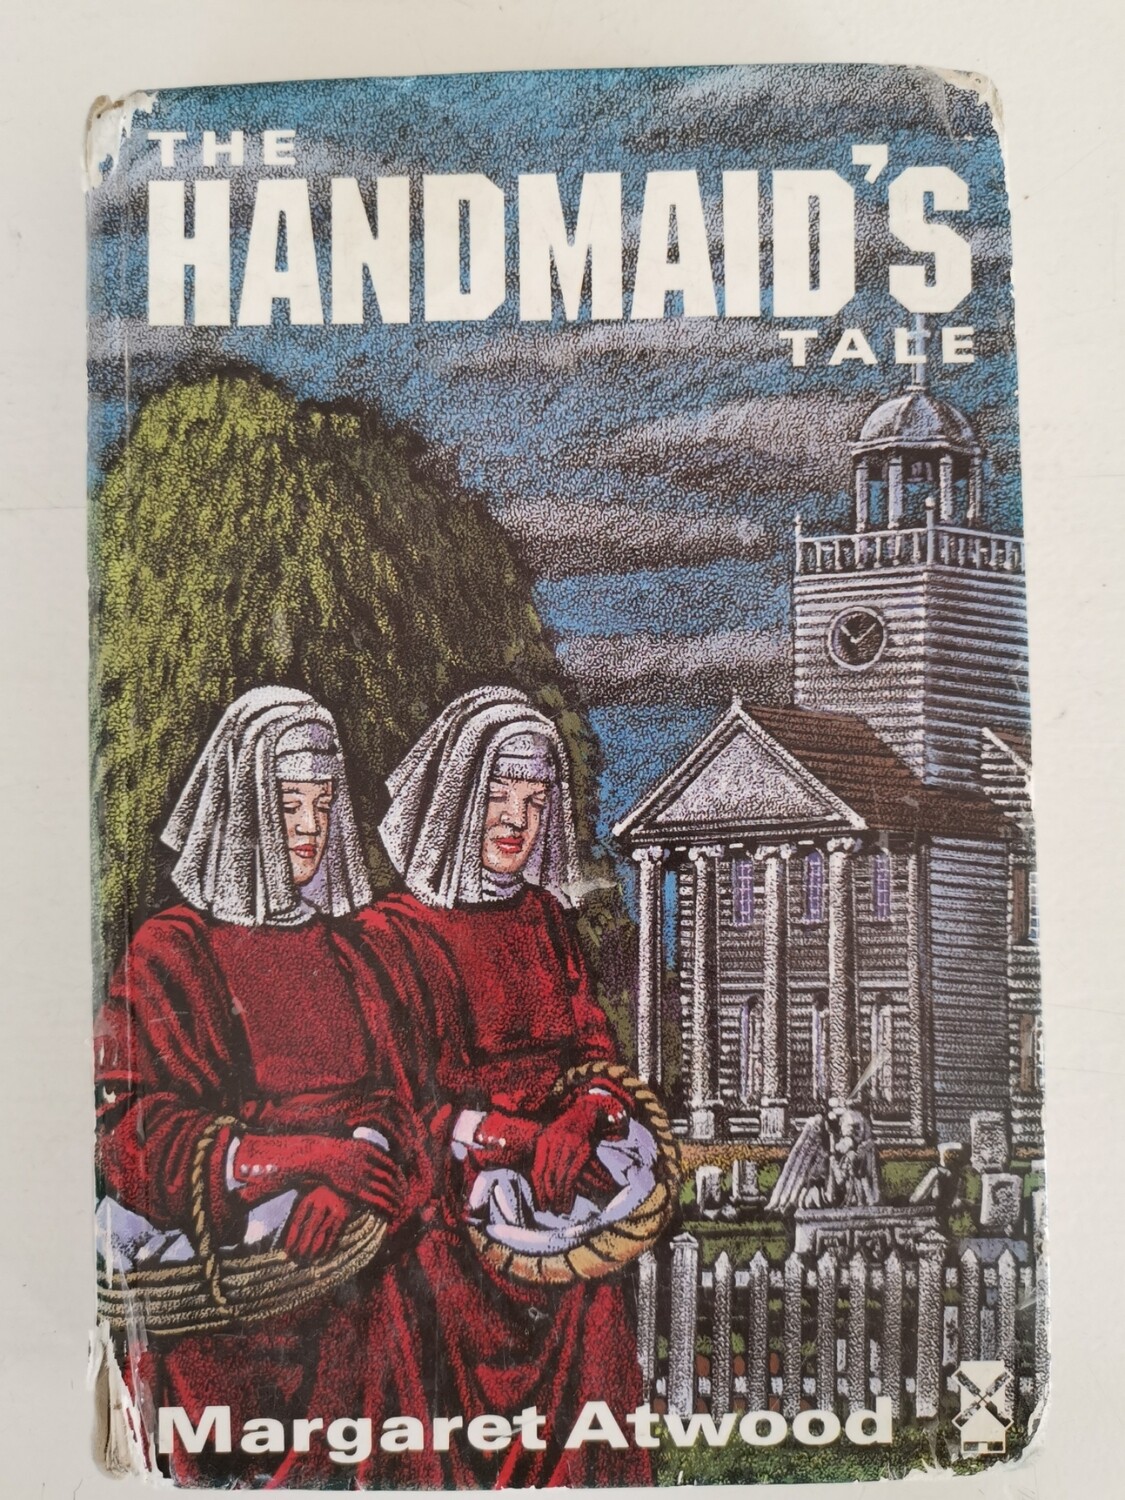 The Handmaid's tale, Margaret Atwood